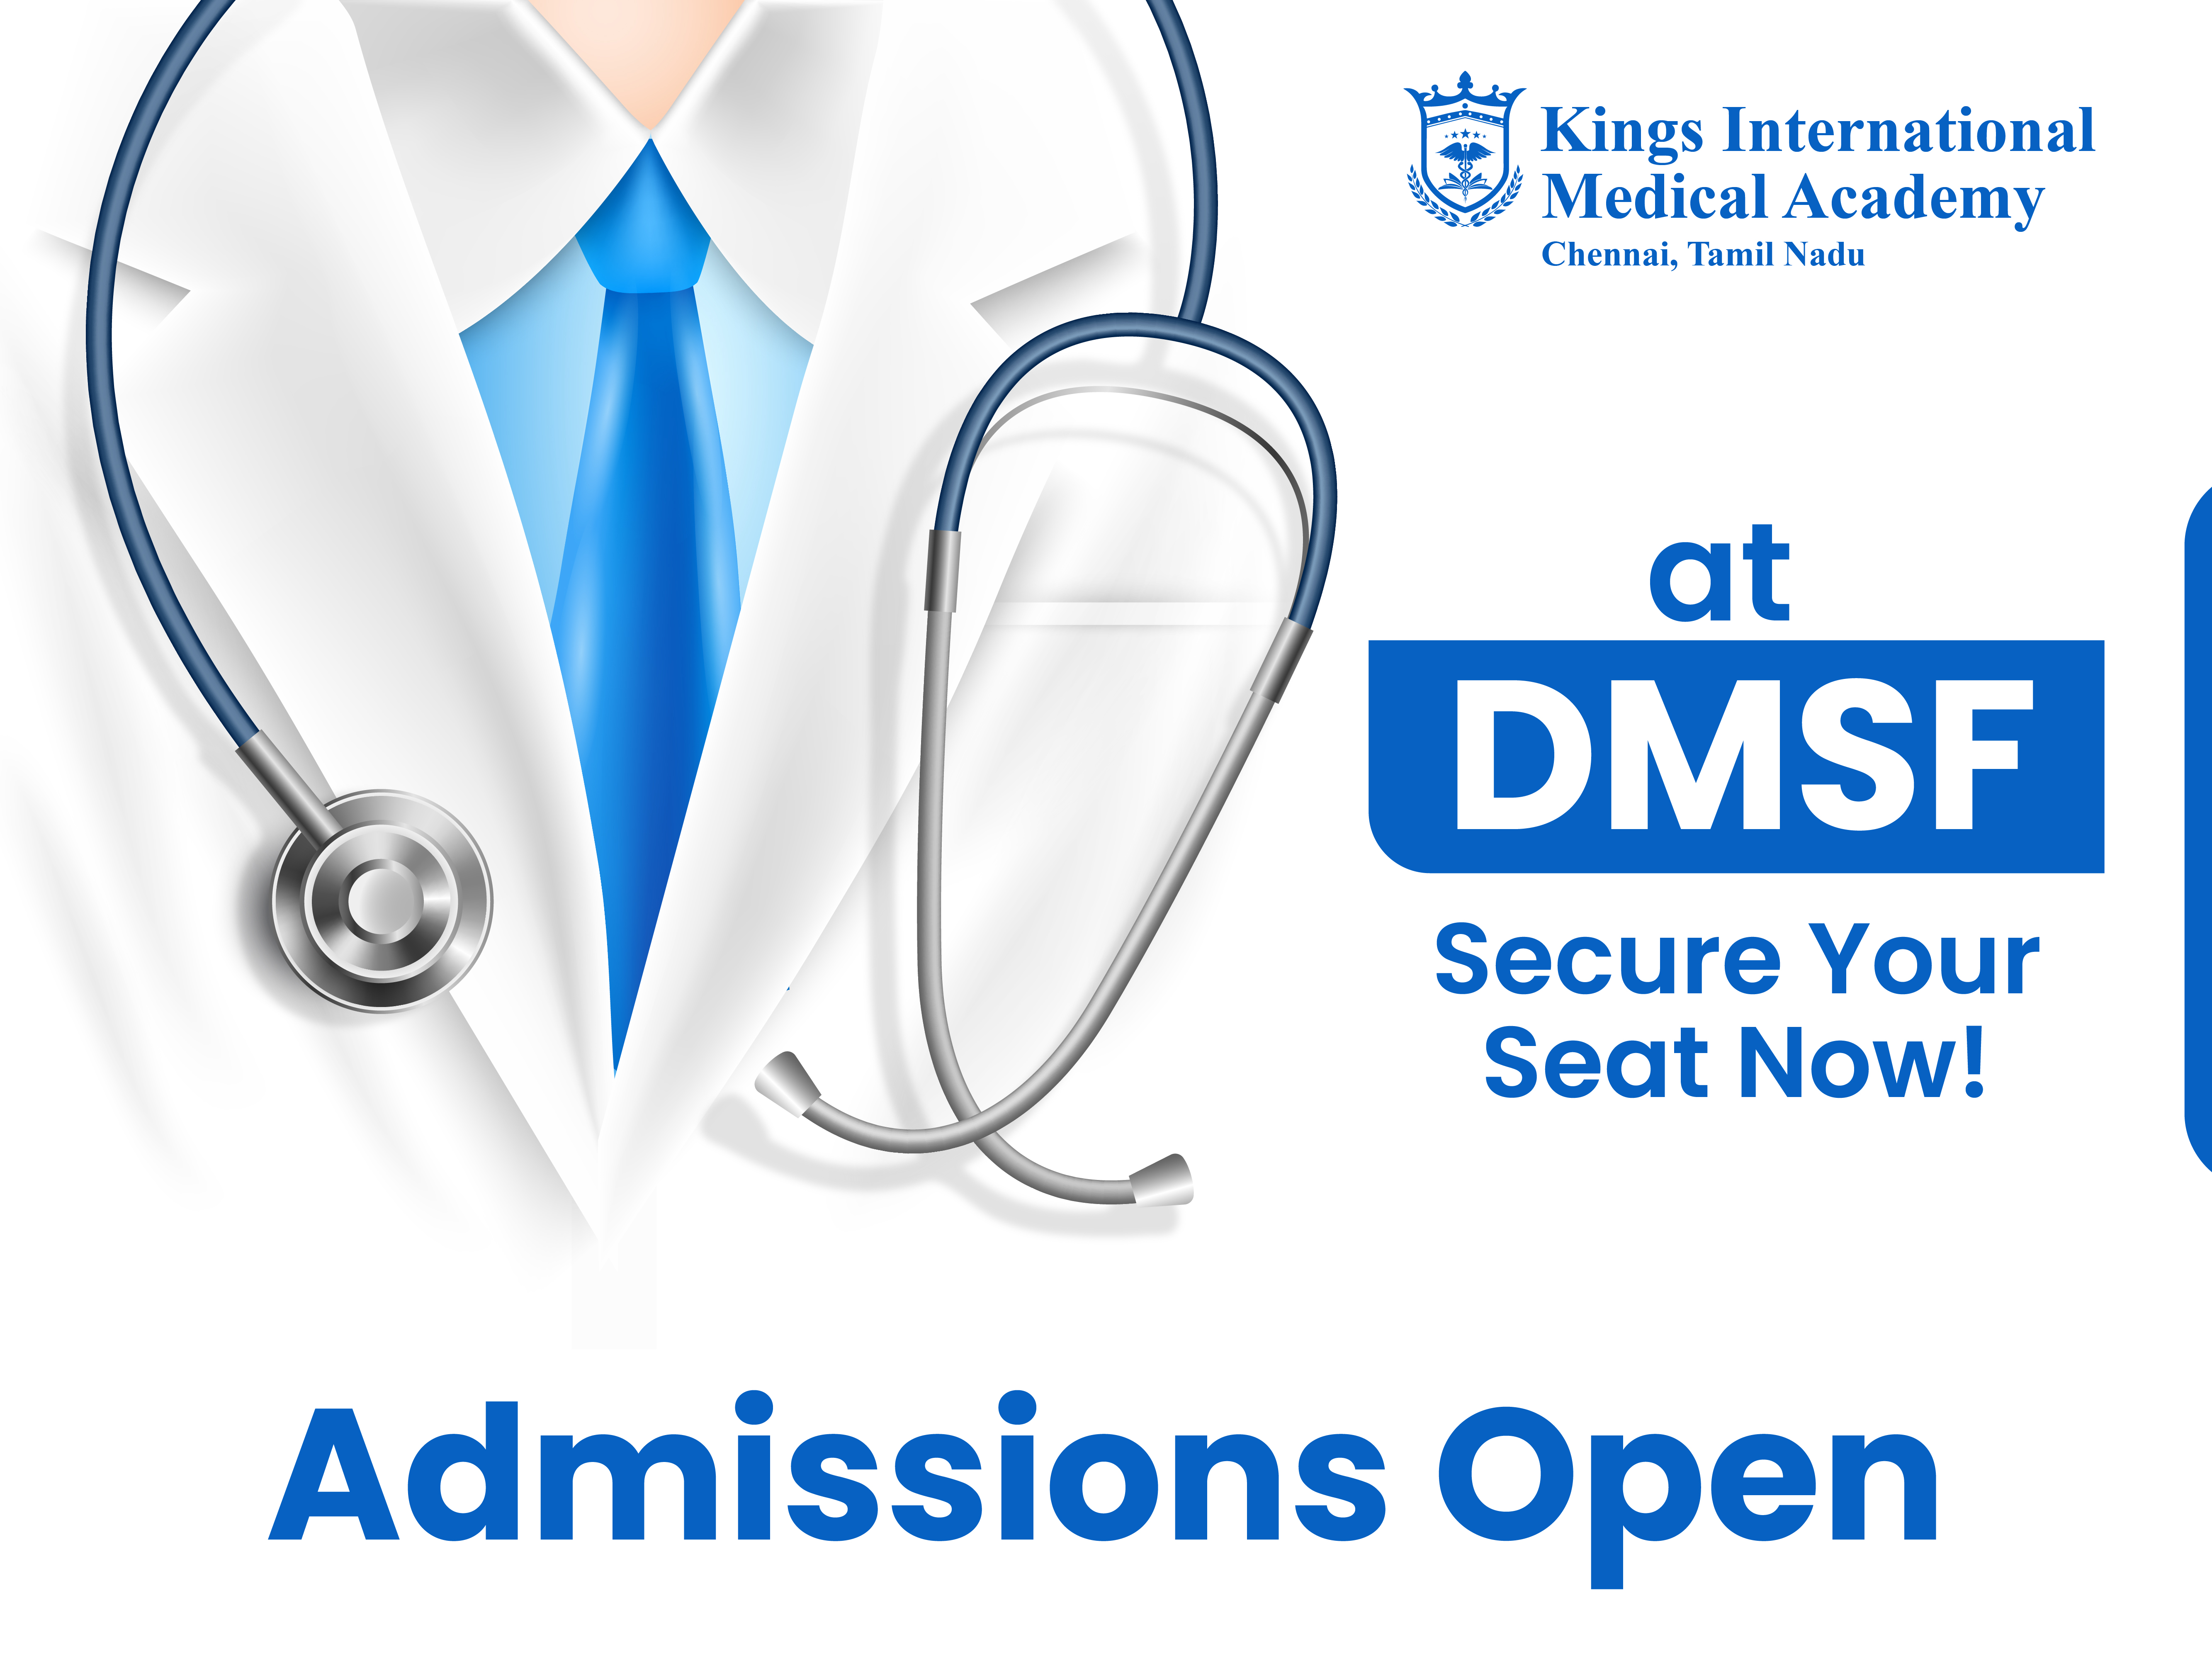 Admissions Open at DMSF: Secure Your Seat Now